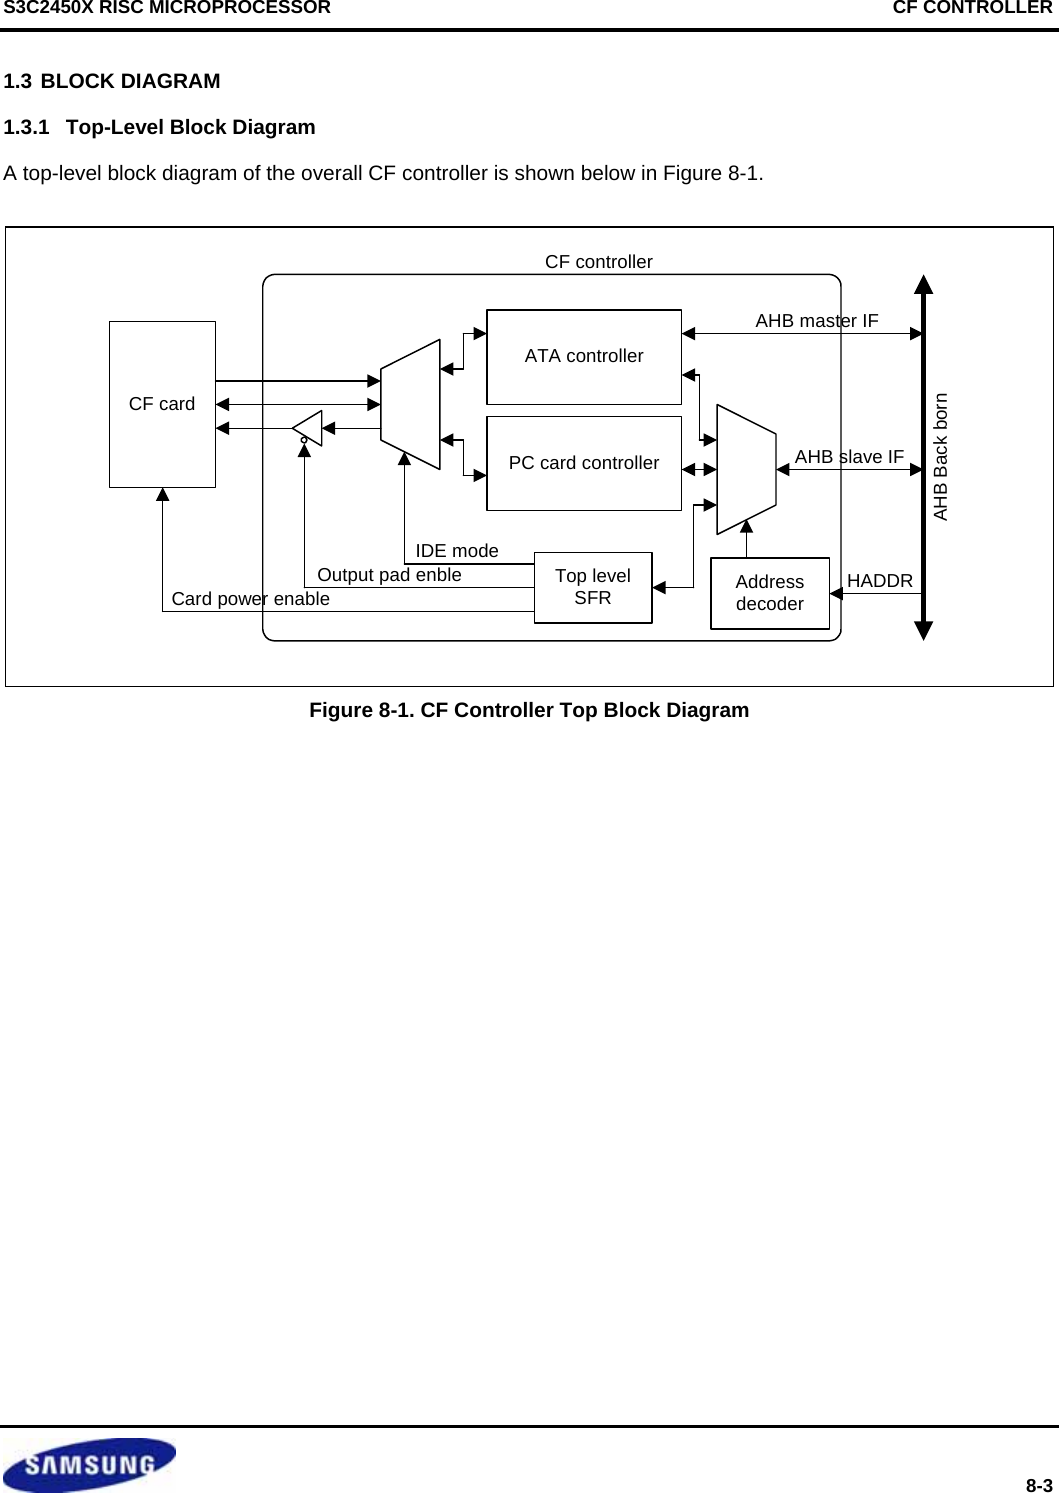 S3C2450X RISC MICROPROCESSOR   CF CONTROLLER  8-3 1.3 BLOCK DIAGRAM 1.3.1  Top-Level Block Diagram A top-level block diagram of the overall CF controller is shown below in Figure 8-1. CF cardOutput pad enbleIDE modeCard power enableAHB master IFAHB slave IFHADDRCF controllerAHB Back bornTop levelSFRPC card controllerATA controllerAddressdecoder Figure 8-1. CF Controller Top Block Diagram  